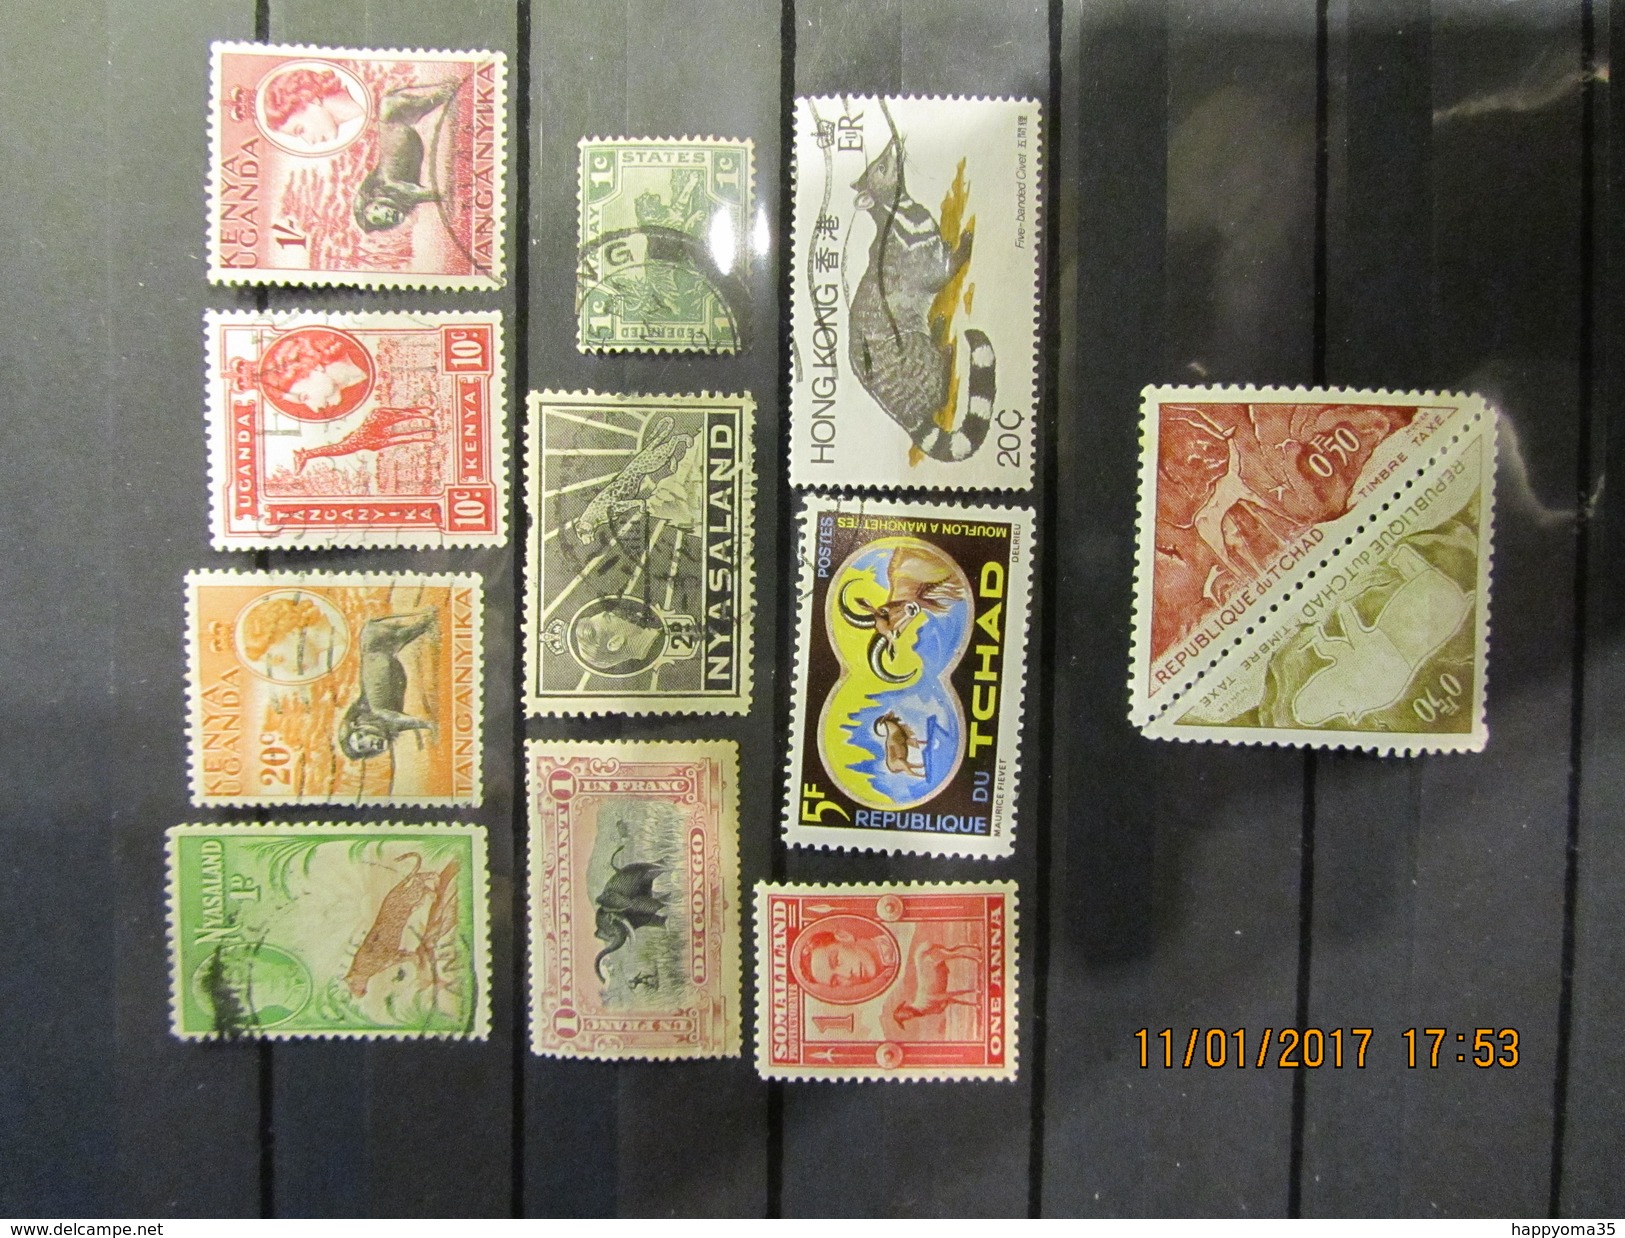 Tiger Wilde Tiere Mix Set Stamps Of Wilde Dieren Tijger Small Selection Of Fine Used 211 - Wild